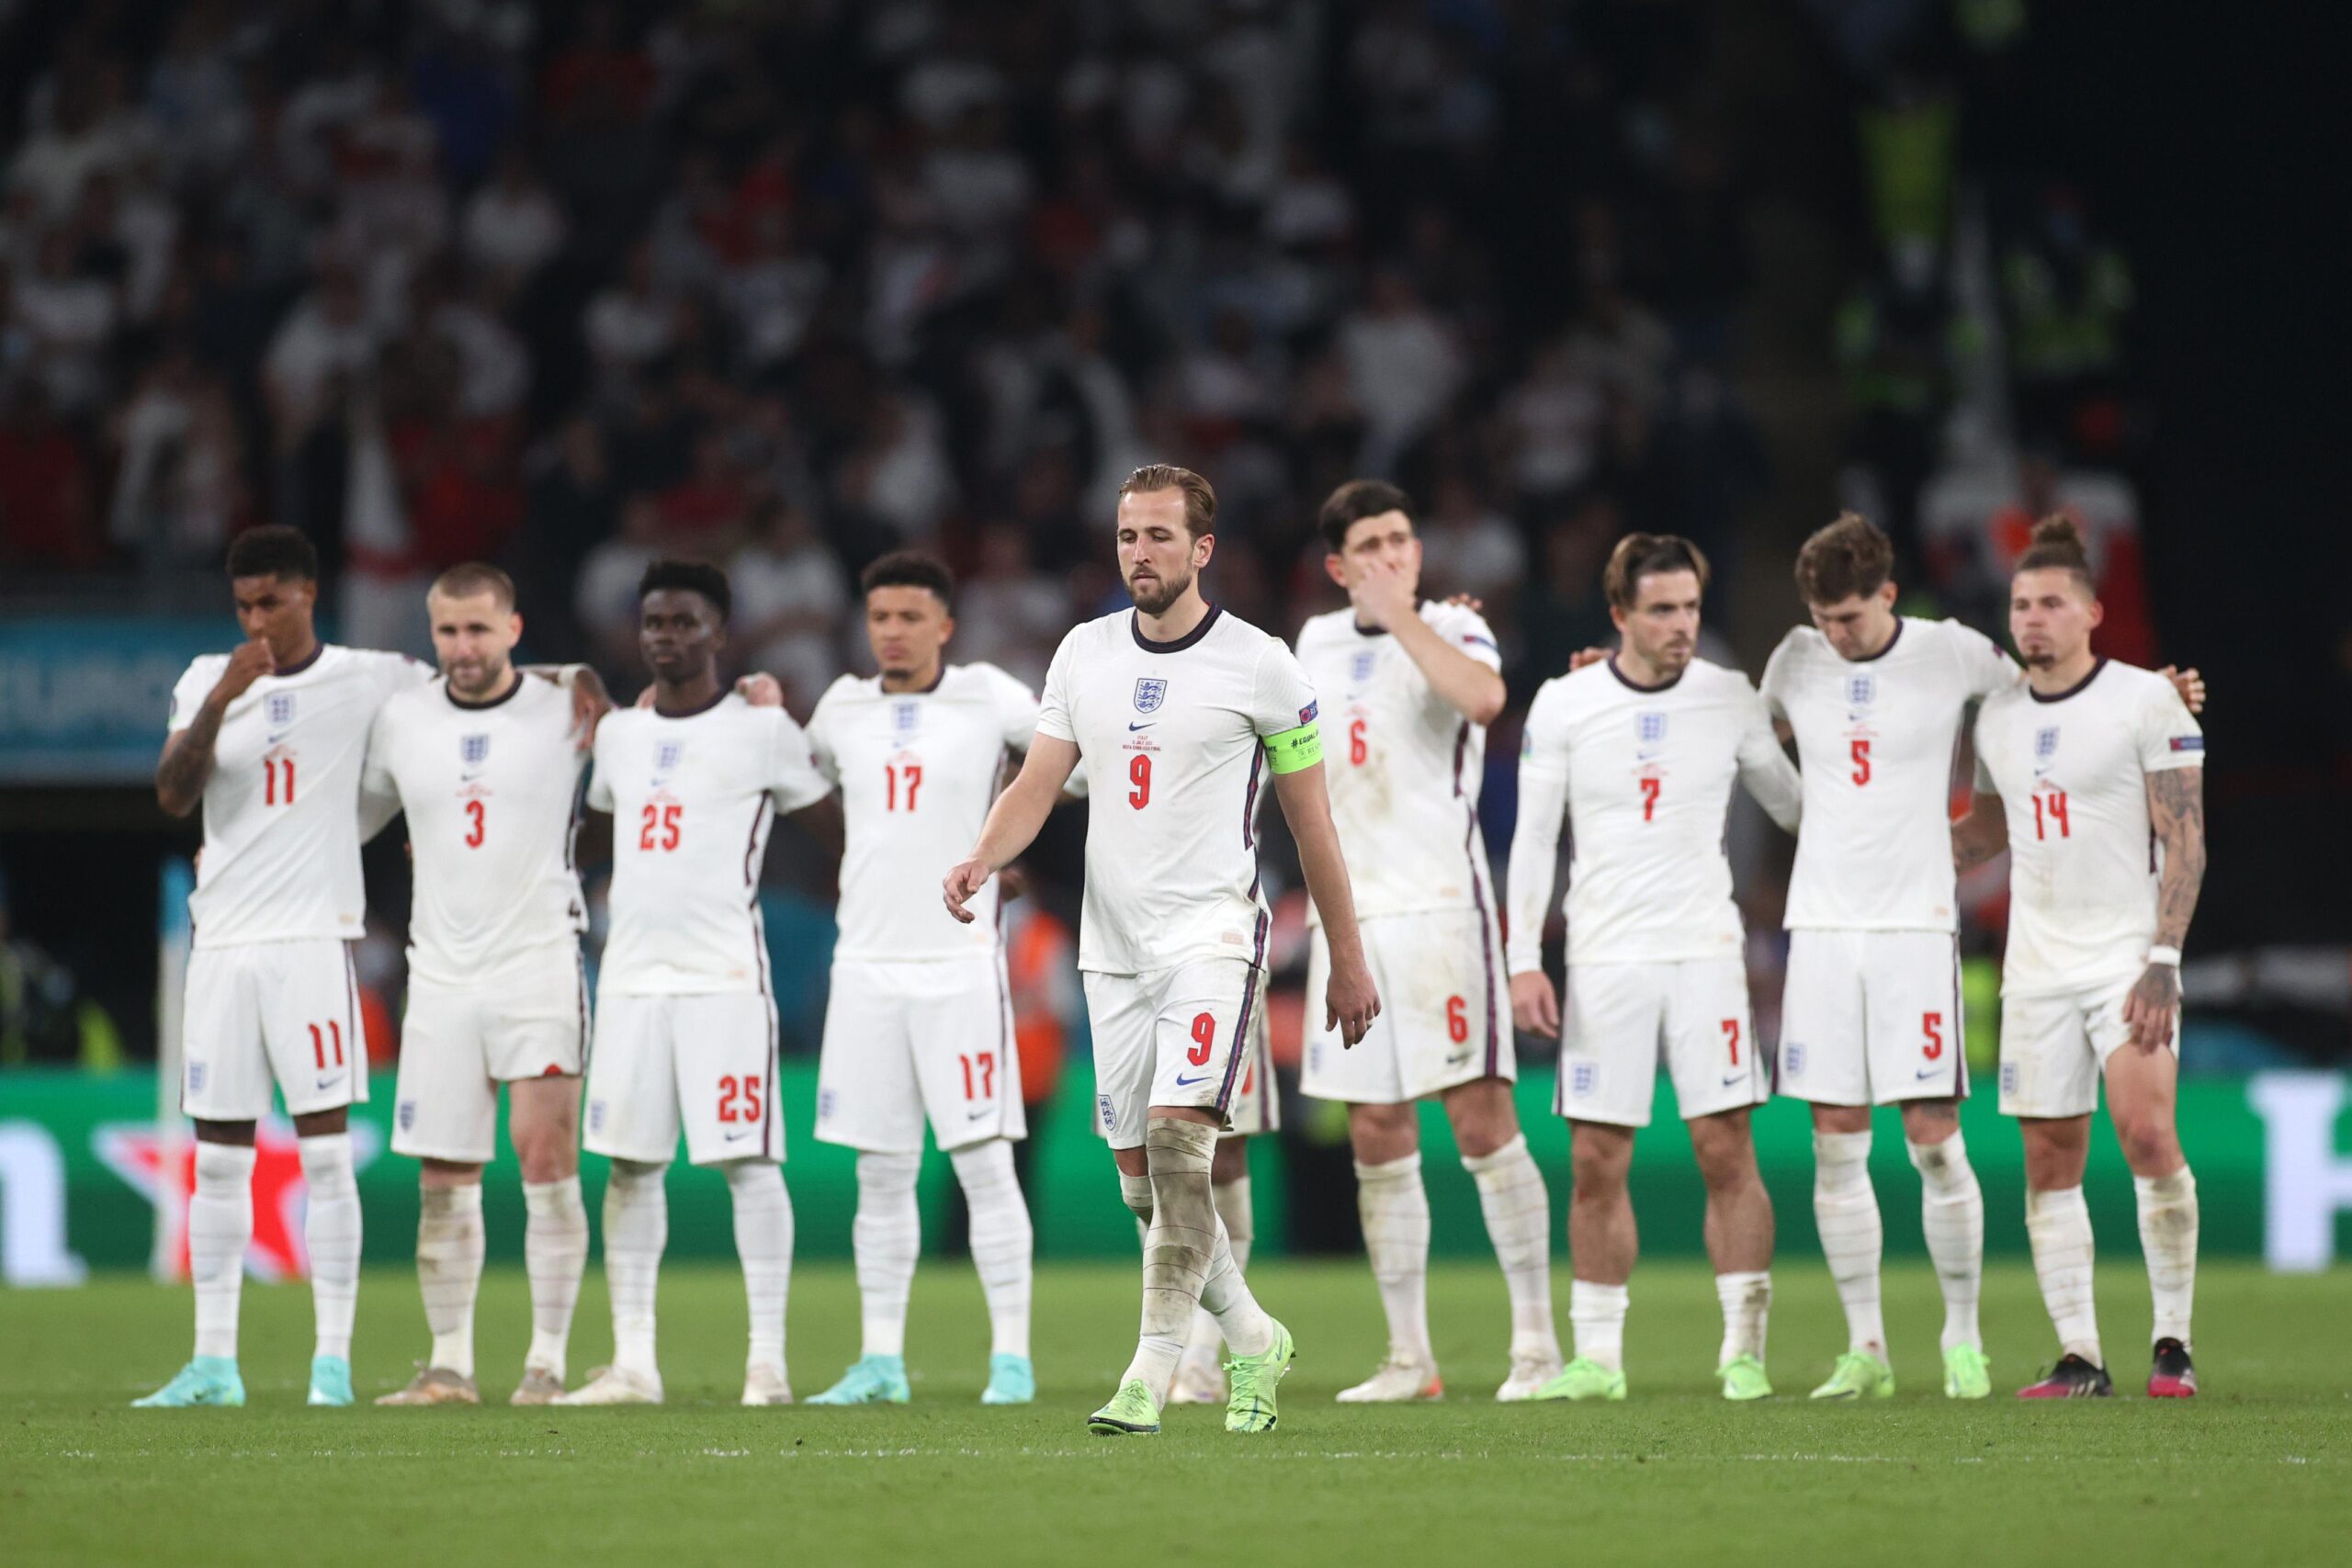 2022 World Cup Group B contains Euro 2020 finalists England, a Wales team that is playing in its first World Cup since 1958, the United States and Iran.